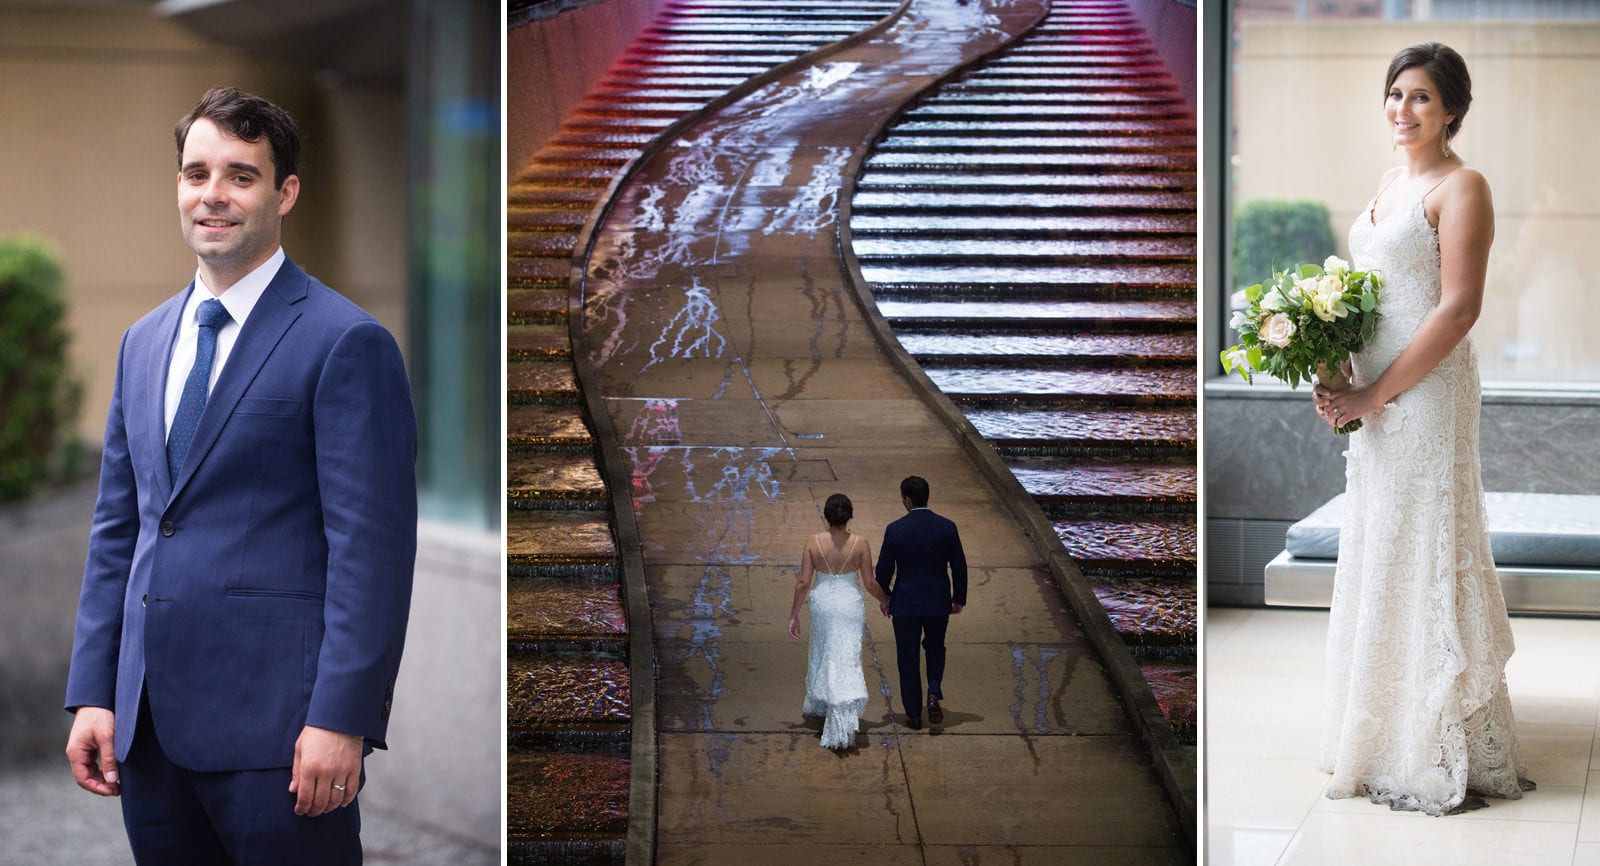 Portrait of a groom in a blue suit. Another of a bride holding a bouquet in a white dress. The couple walking up a serpentine path with water steps on either side during their Wedding Photography at Fairmont Hotel Pittsburgh.